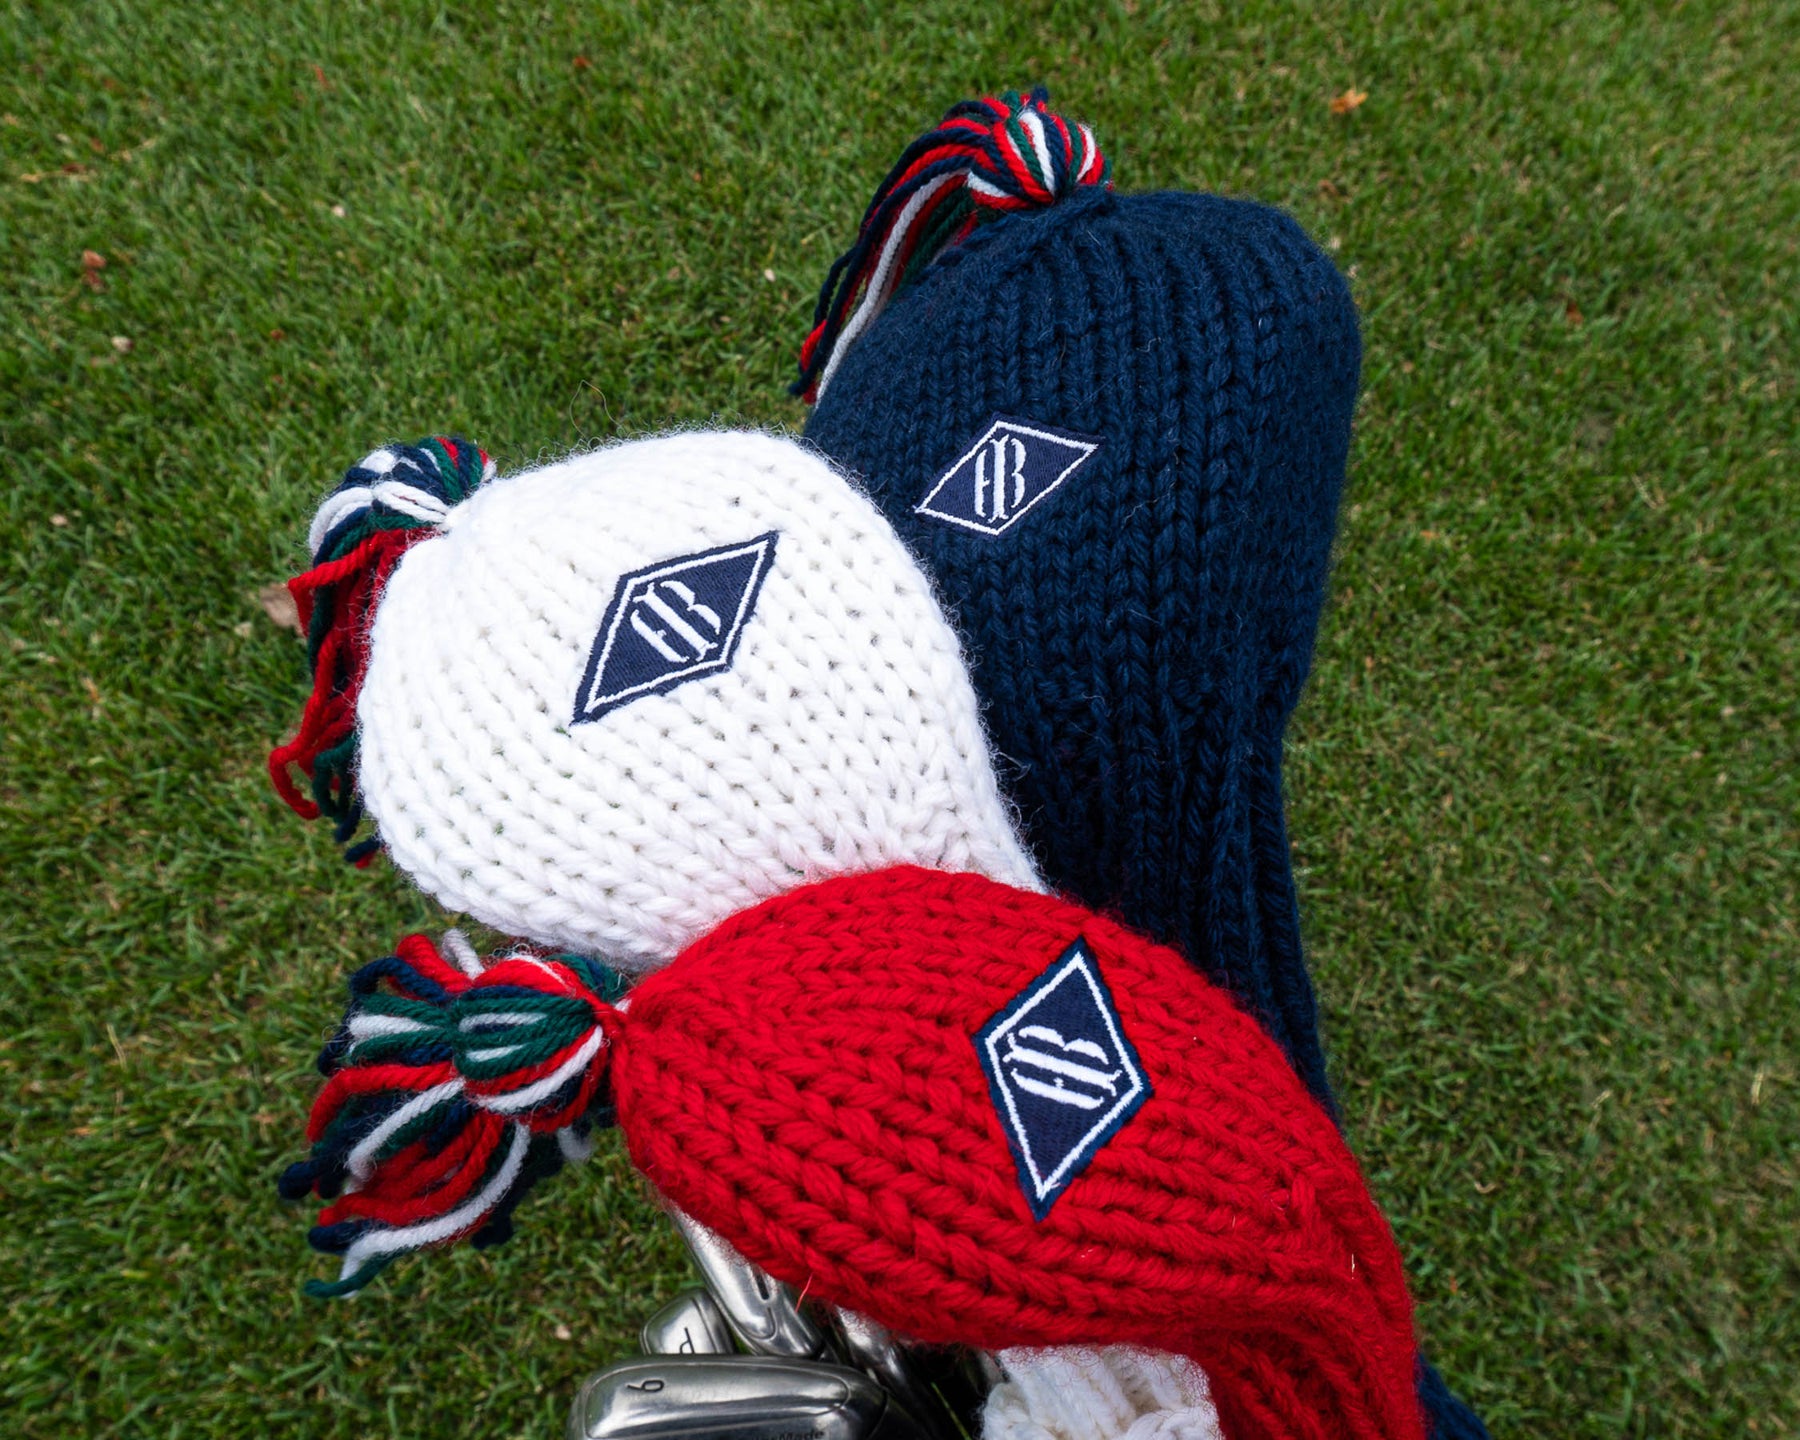 Red, white, and blue headcover set with embroidered Holderness and Bourne patch against grassy background.